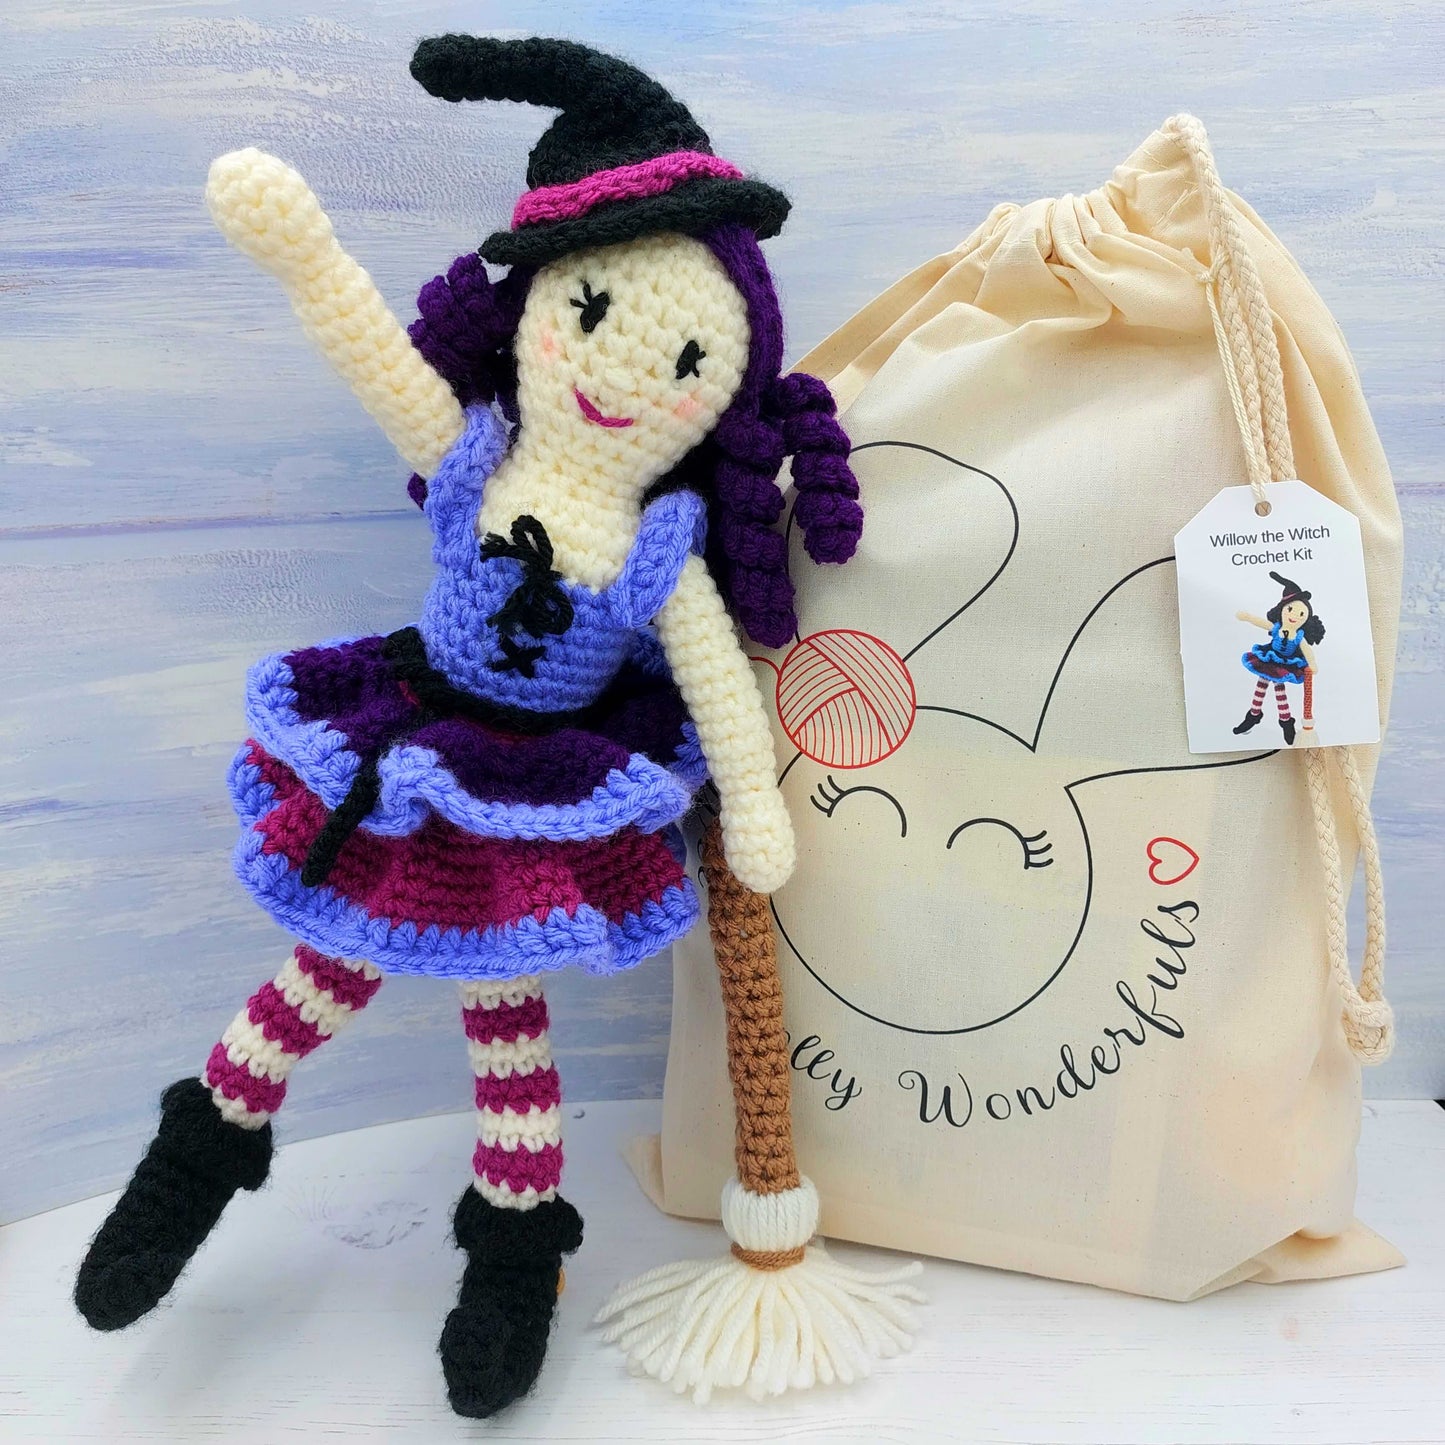 Willow the Witch Crochet Kit